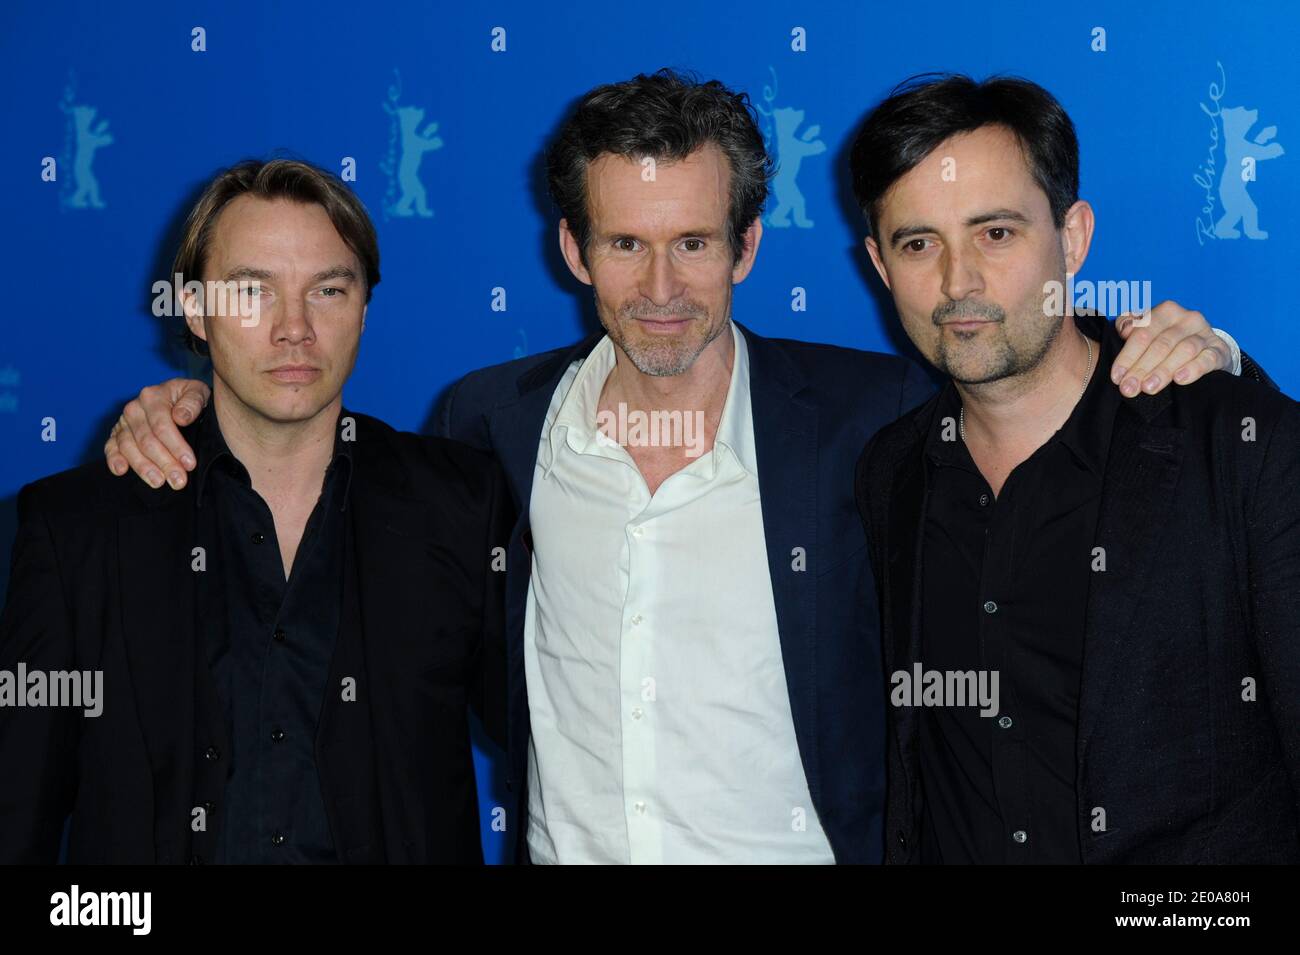 German actor Thomas Arnold, German actor Ulrich Matthes and Austrian actor Harald Schrott attend the 'La mer à l'aube' photocall for the 62nd Berlin International Film Festival, in Berlin, Germany, 14 February 2012. The 62nd Berlinale takes place from 09 to 19 February. Photo by Aurore Marechal/ABACAPRESS.COM Stock Photo